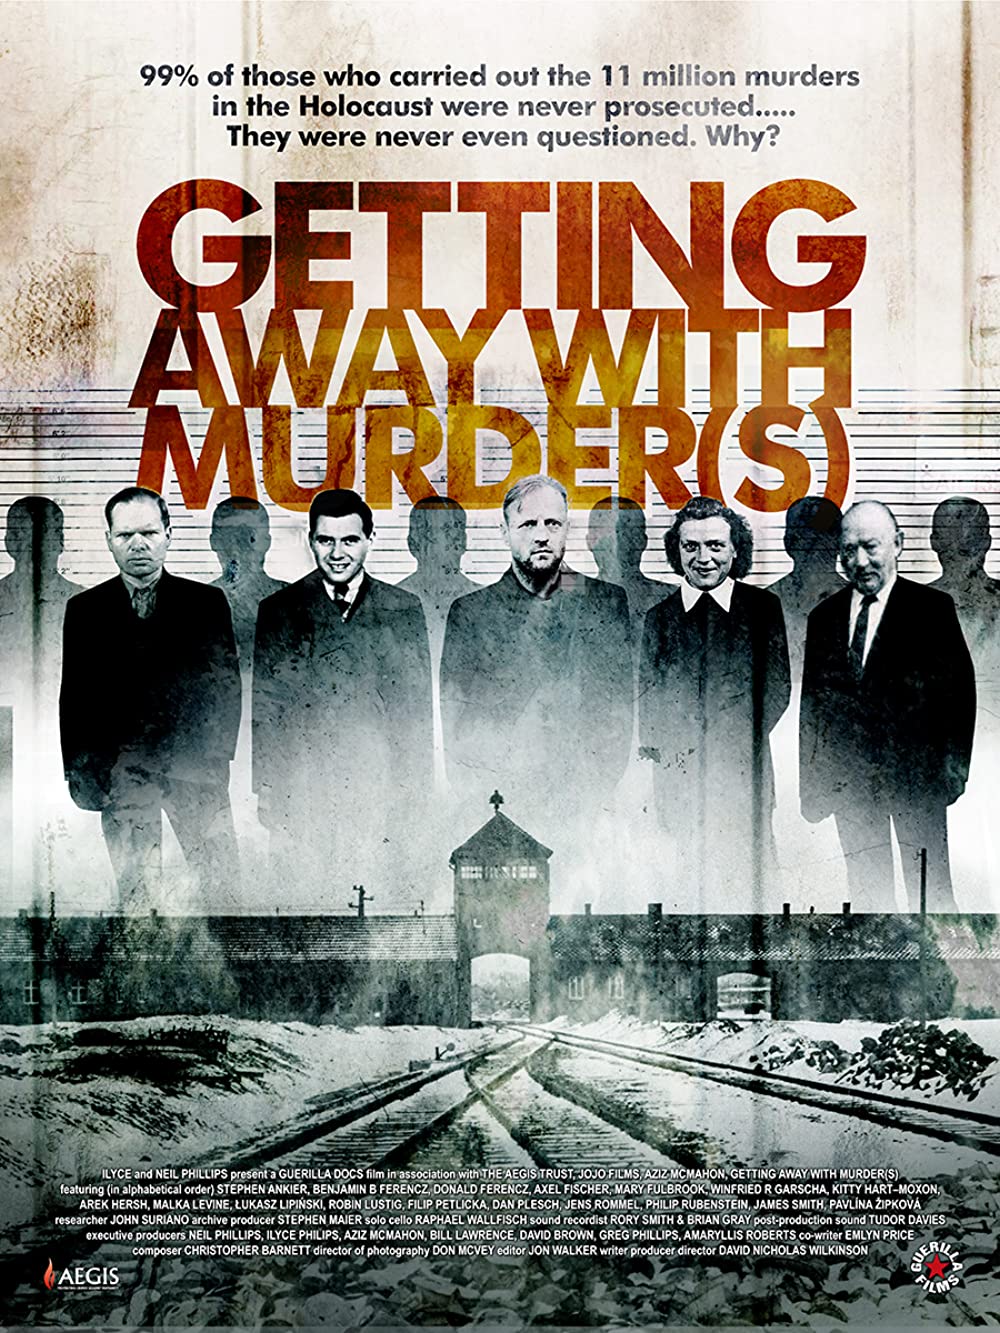 You are currently viewing Getting Away with Murder(s) (2021)